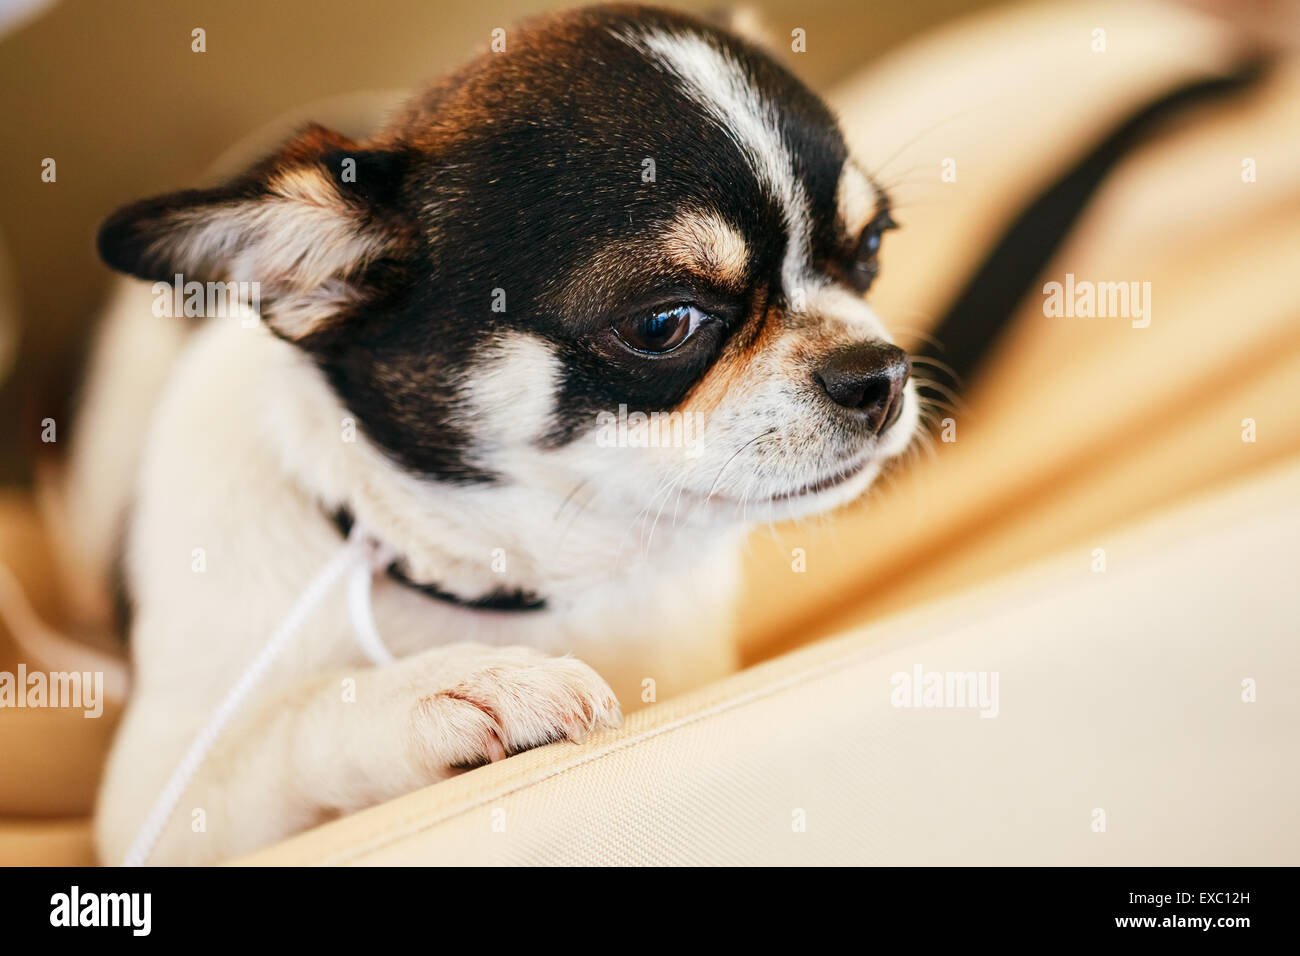 Chihuahua dog, 1.5 years old, sitting on a pet bed Stock Photo